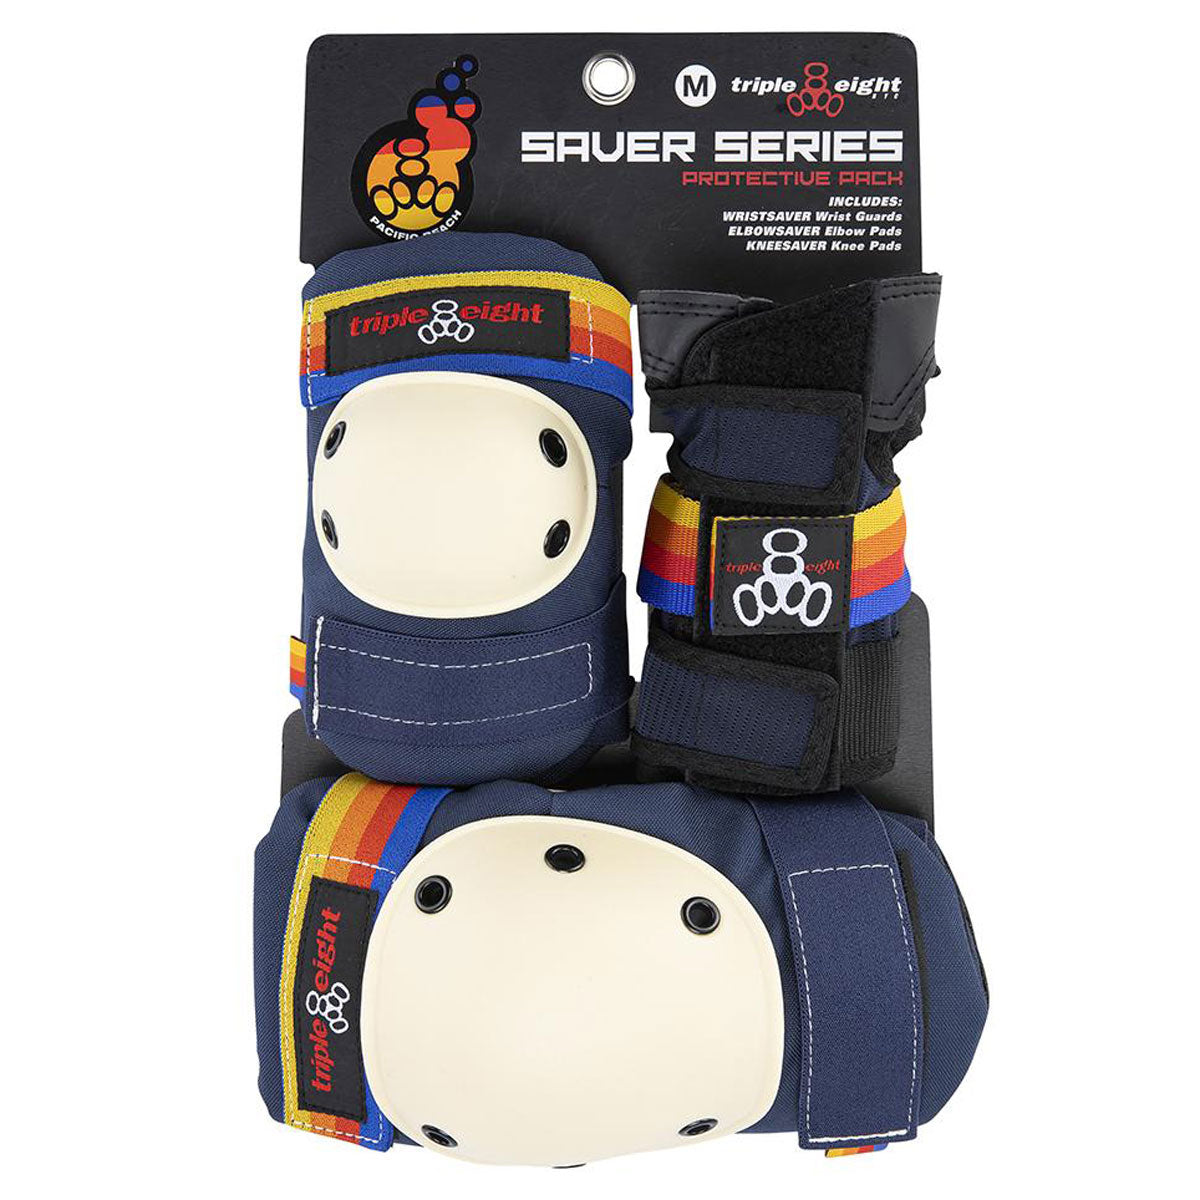 Triple Eight Saver 3 Pack Of Pads - Pacific Beach image 2